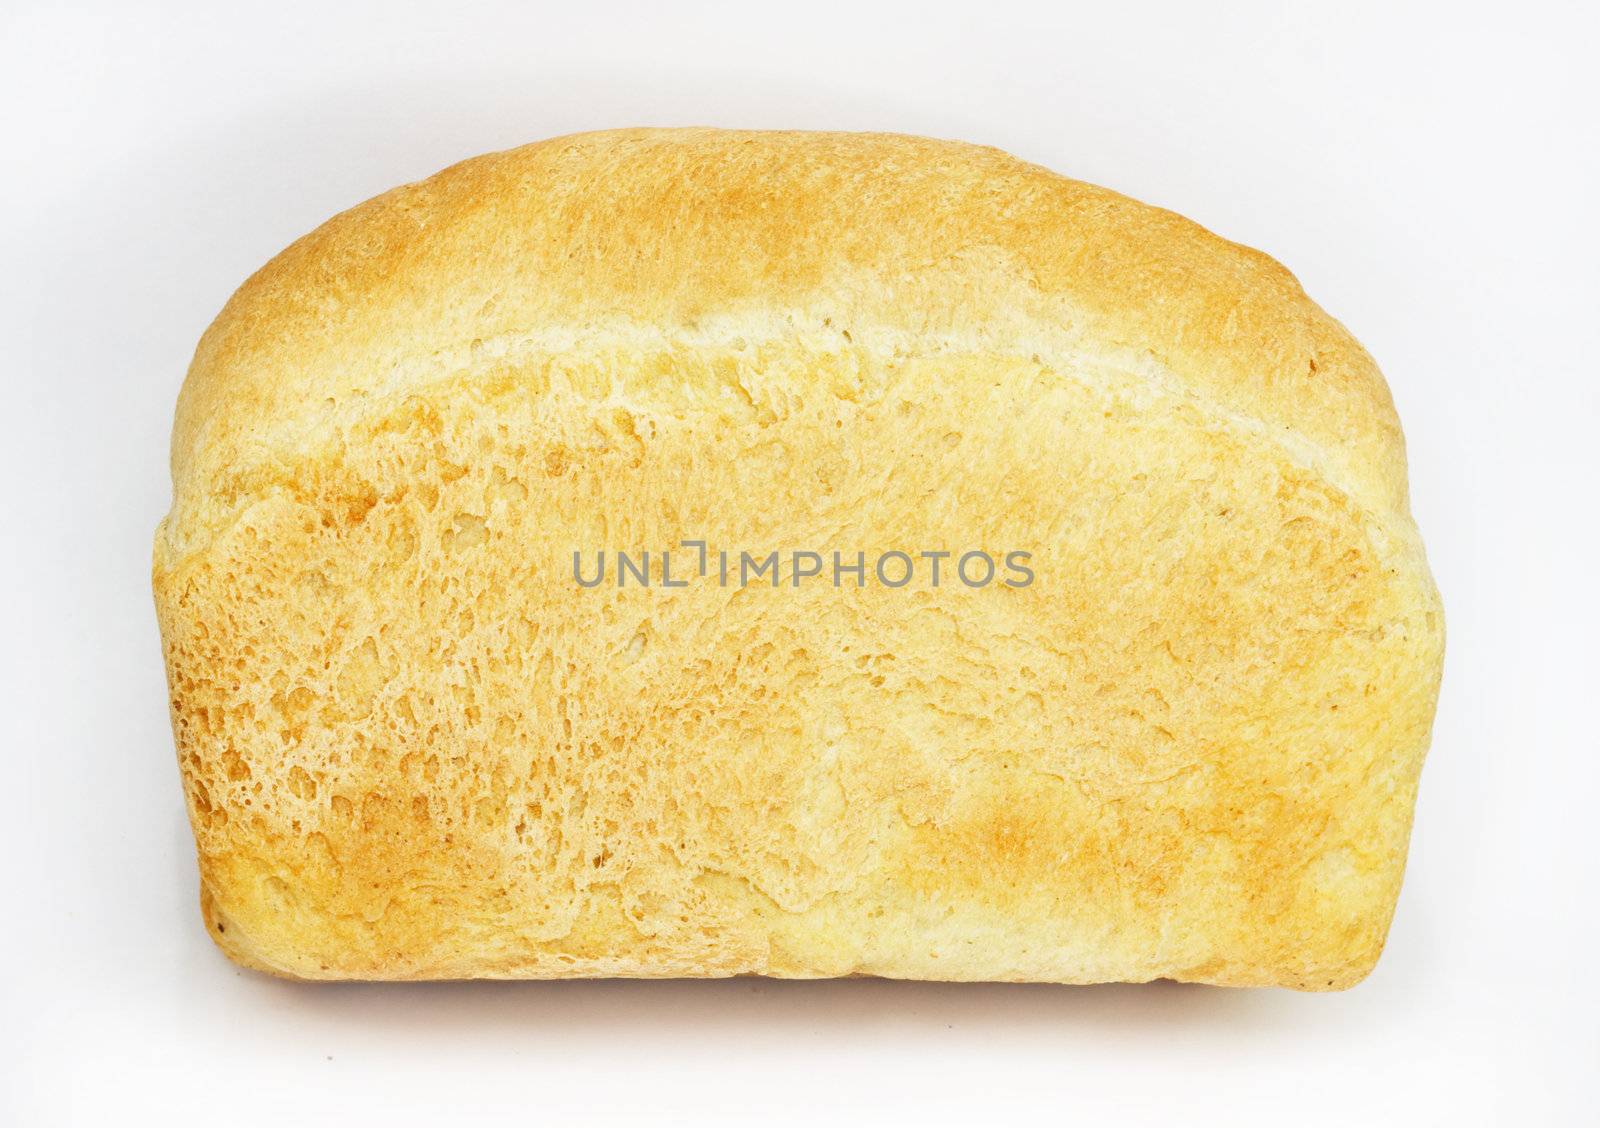 Bread isolated over white background 